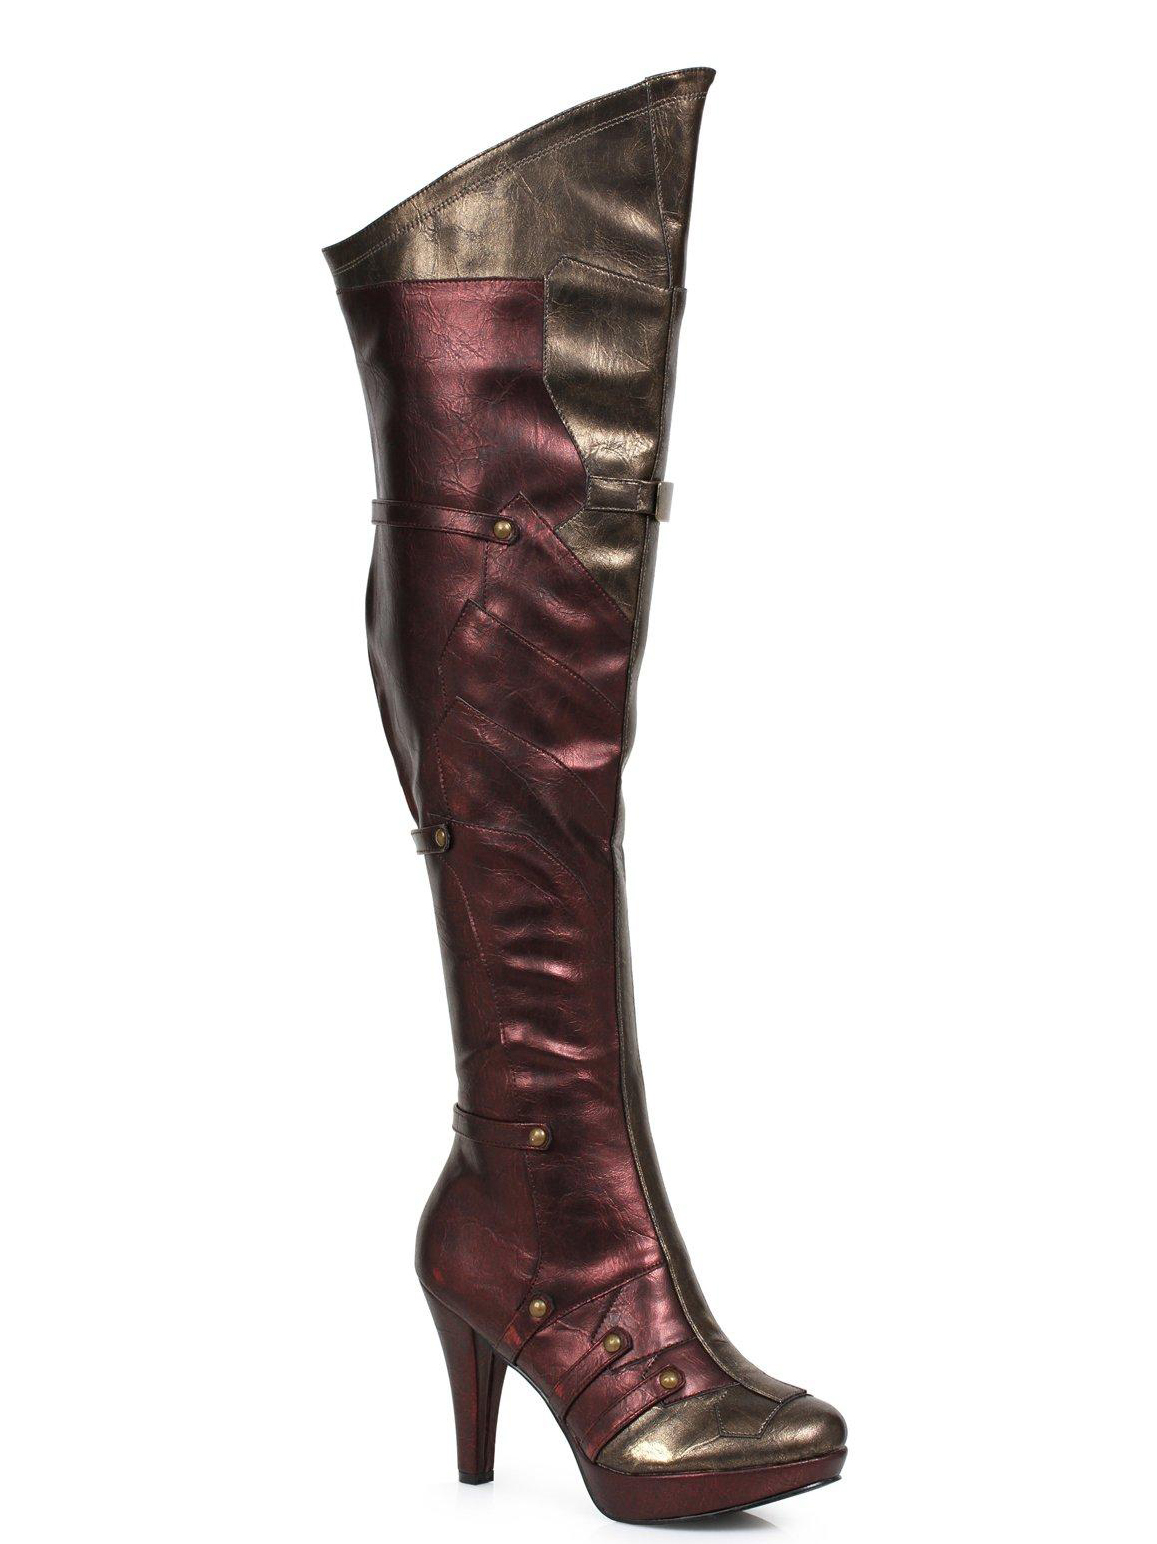 Wonder Boots Costume Thigh High 4" Heel Adult Boots Size 7 - image 1 of 2